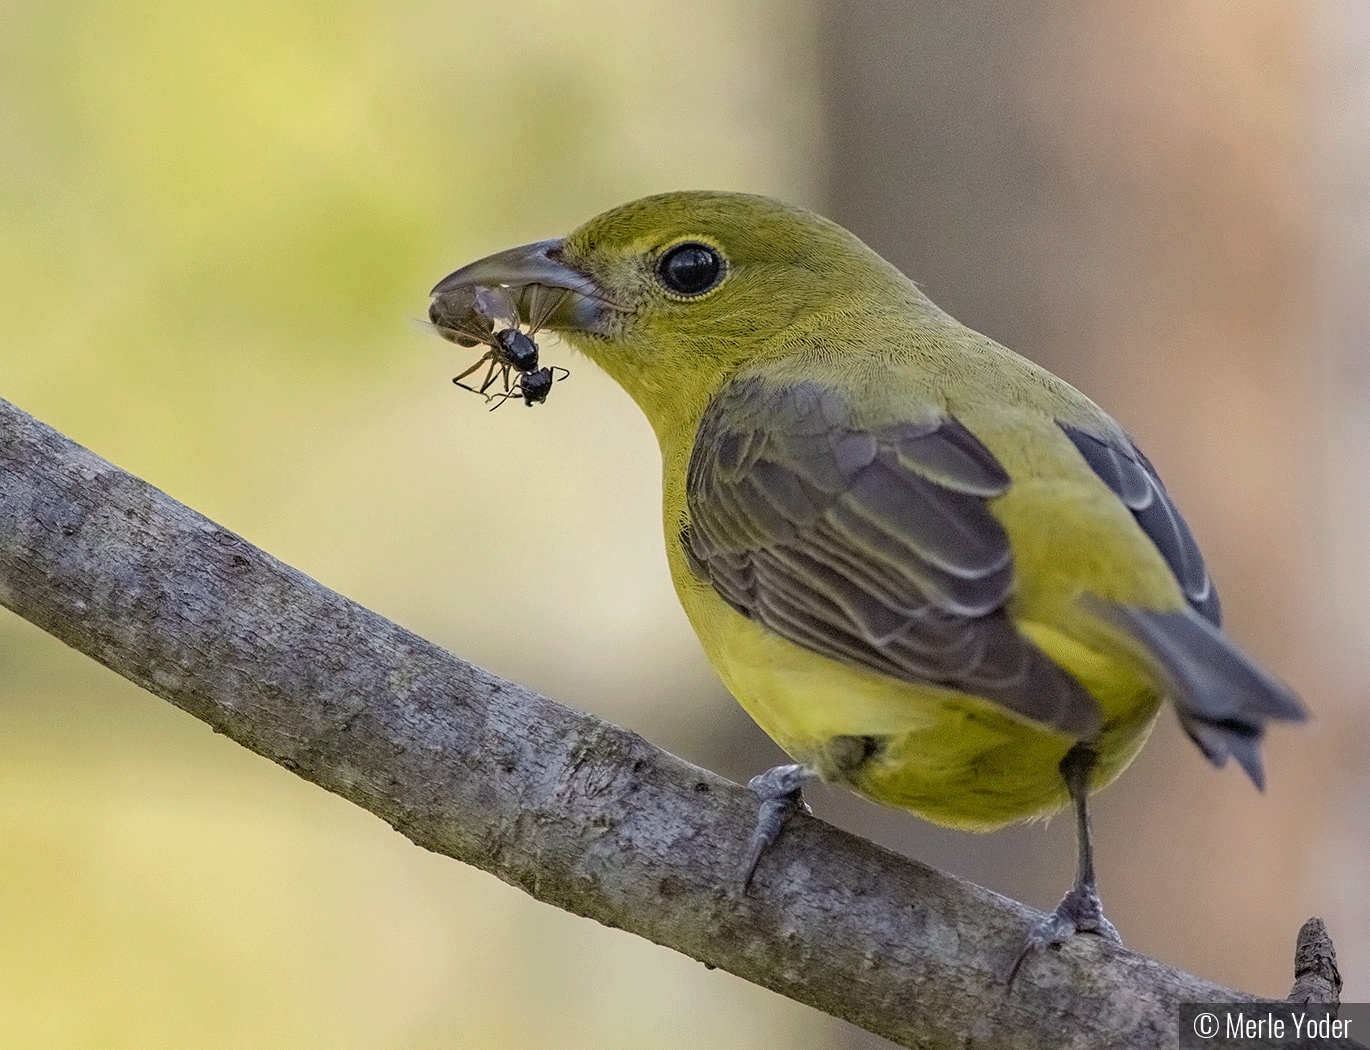 A female Scarlet Tanager with some type of wasp in its beak.